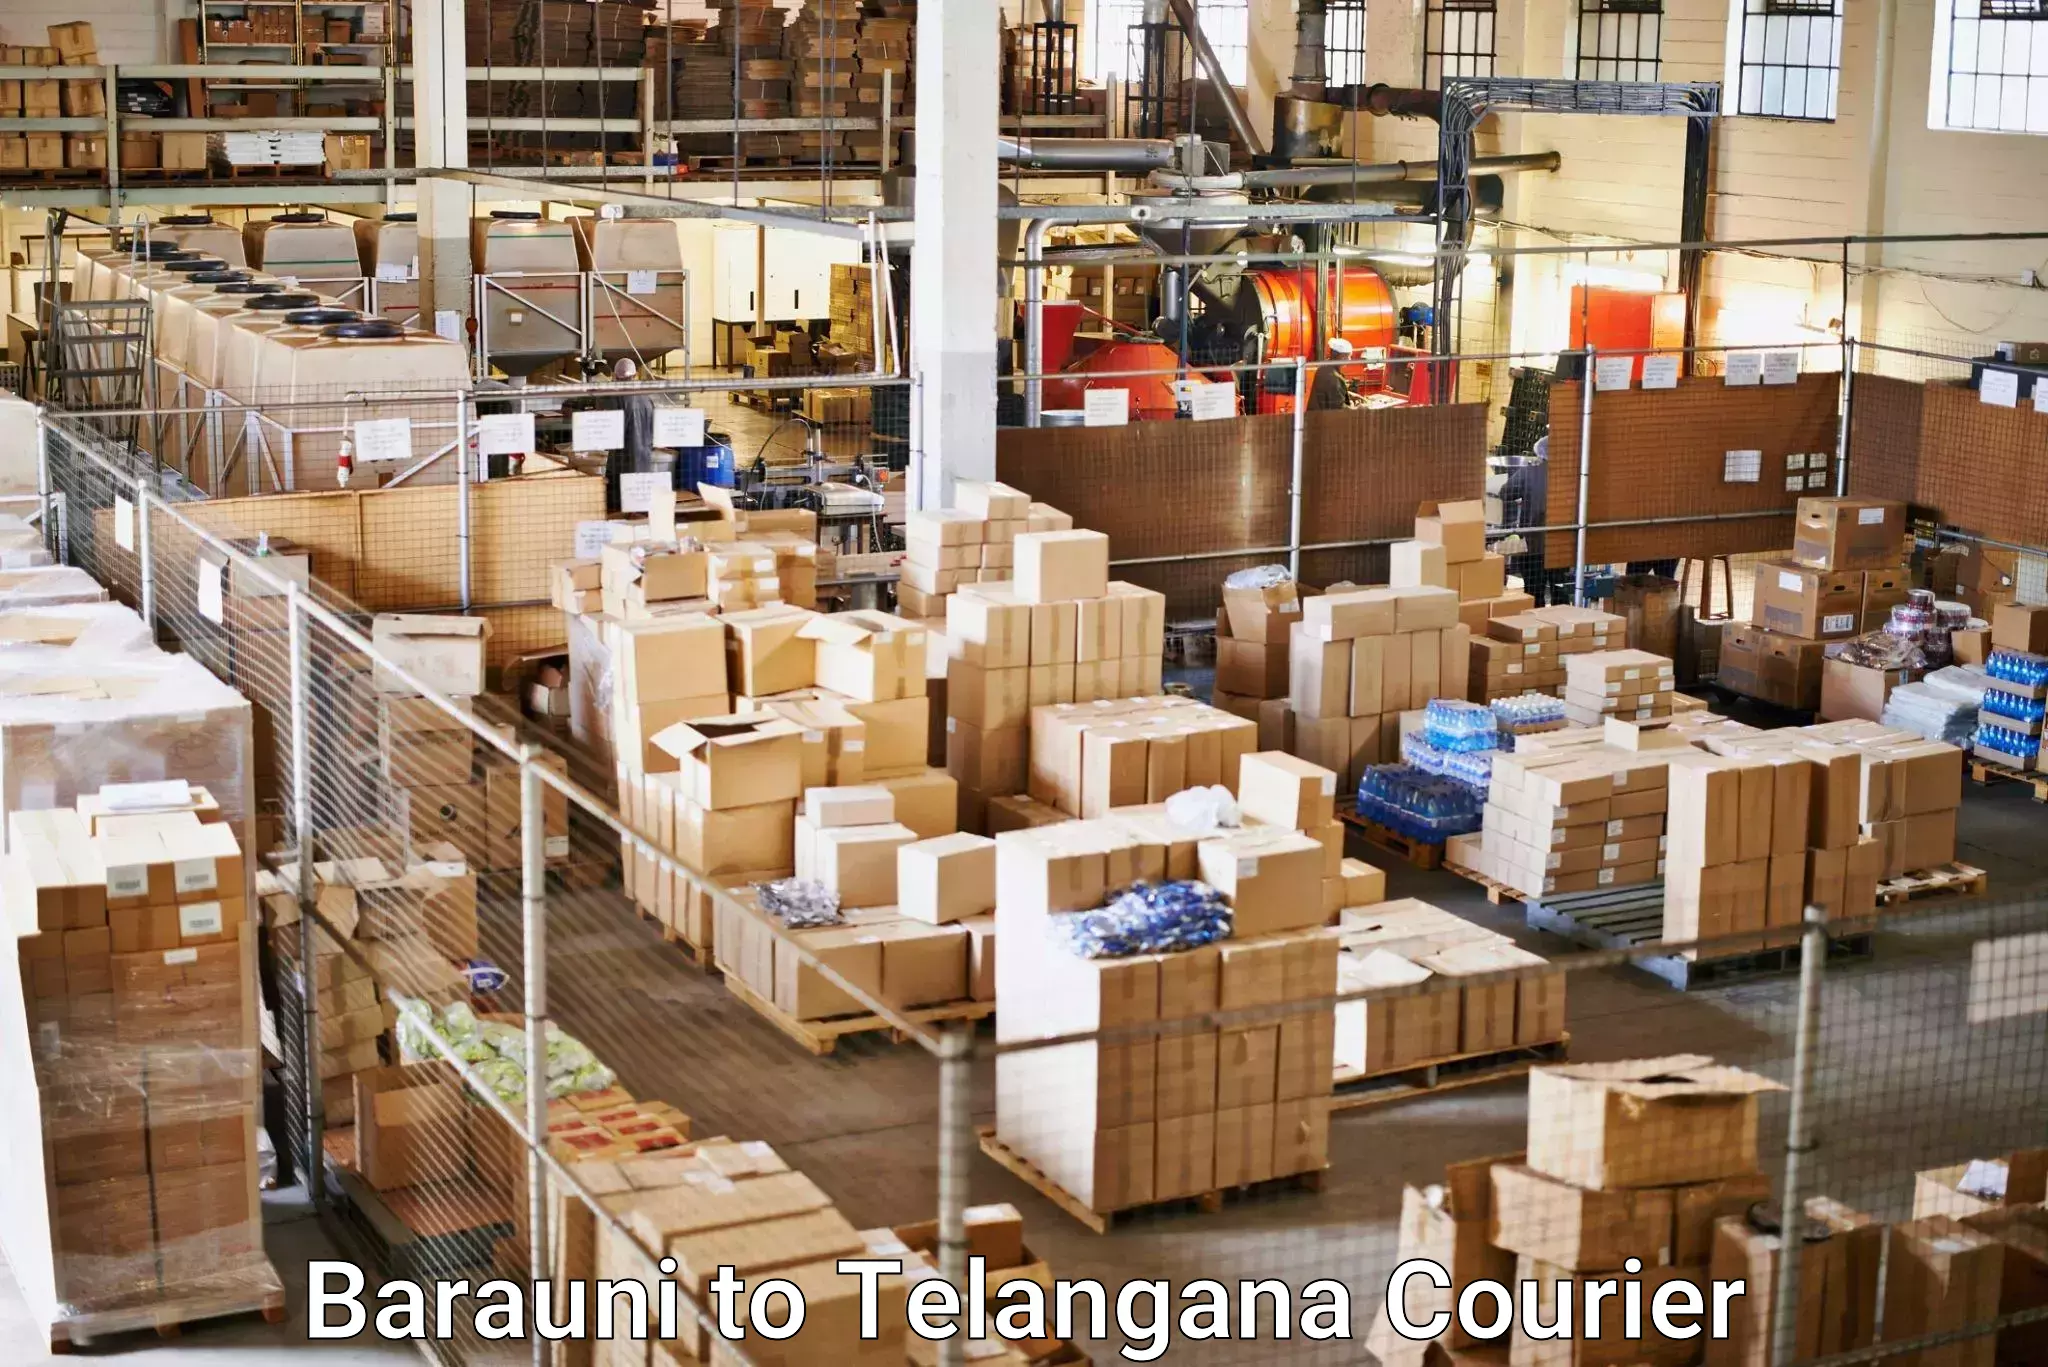 Global courier networks Barauni to Amangal